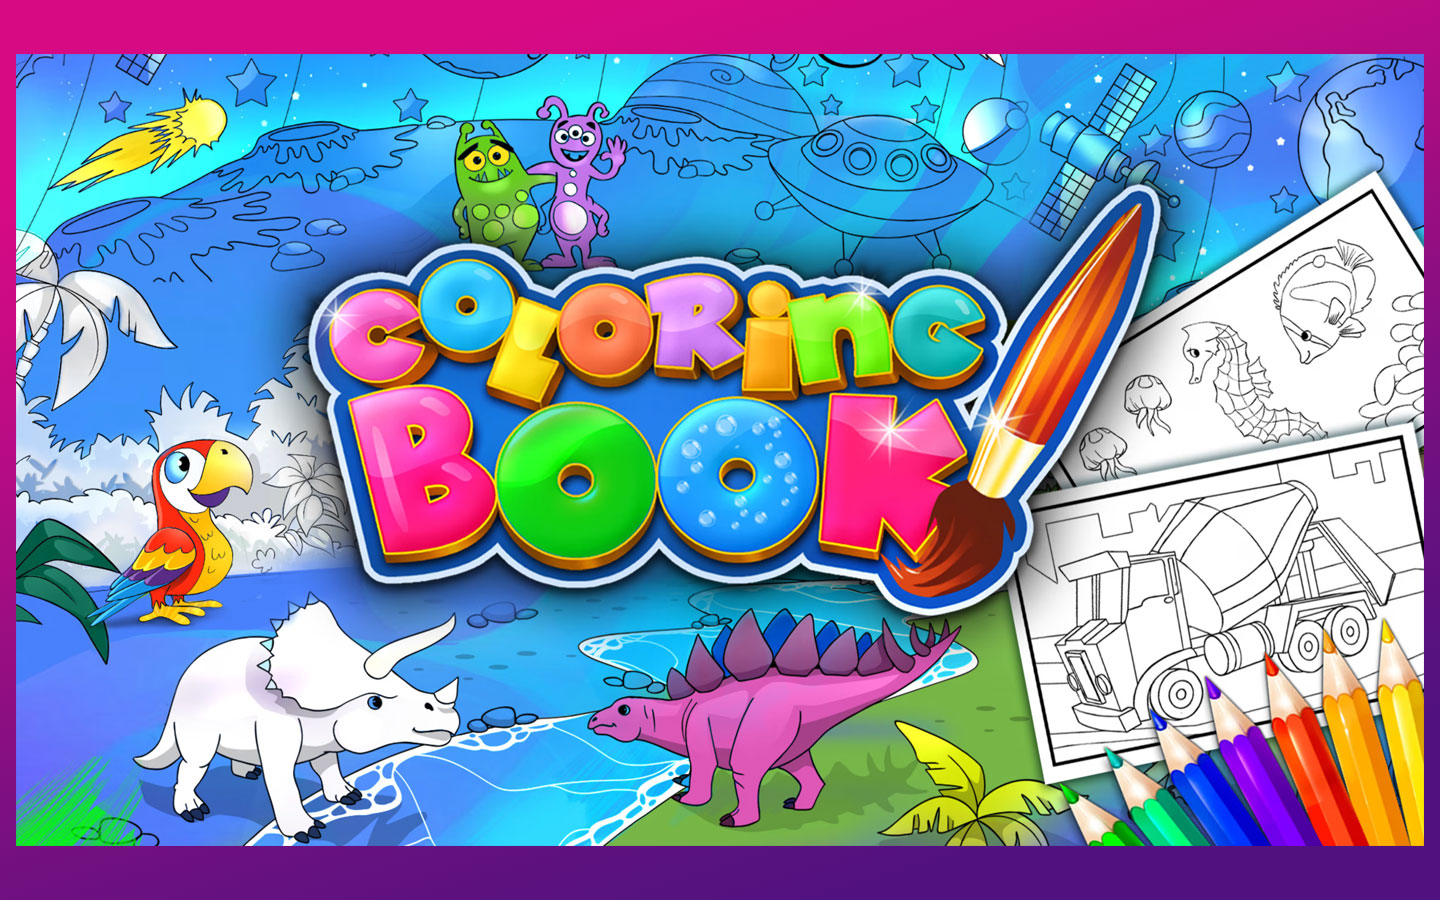 The Coloring Book Game on Nintendo Switch